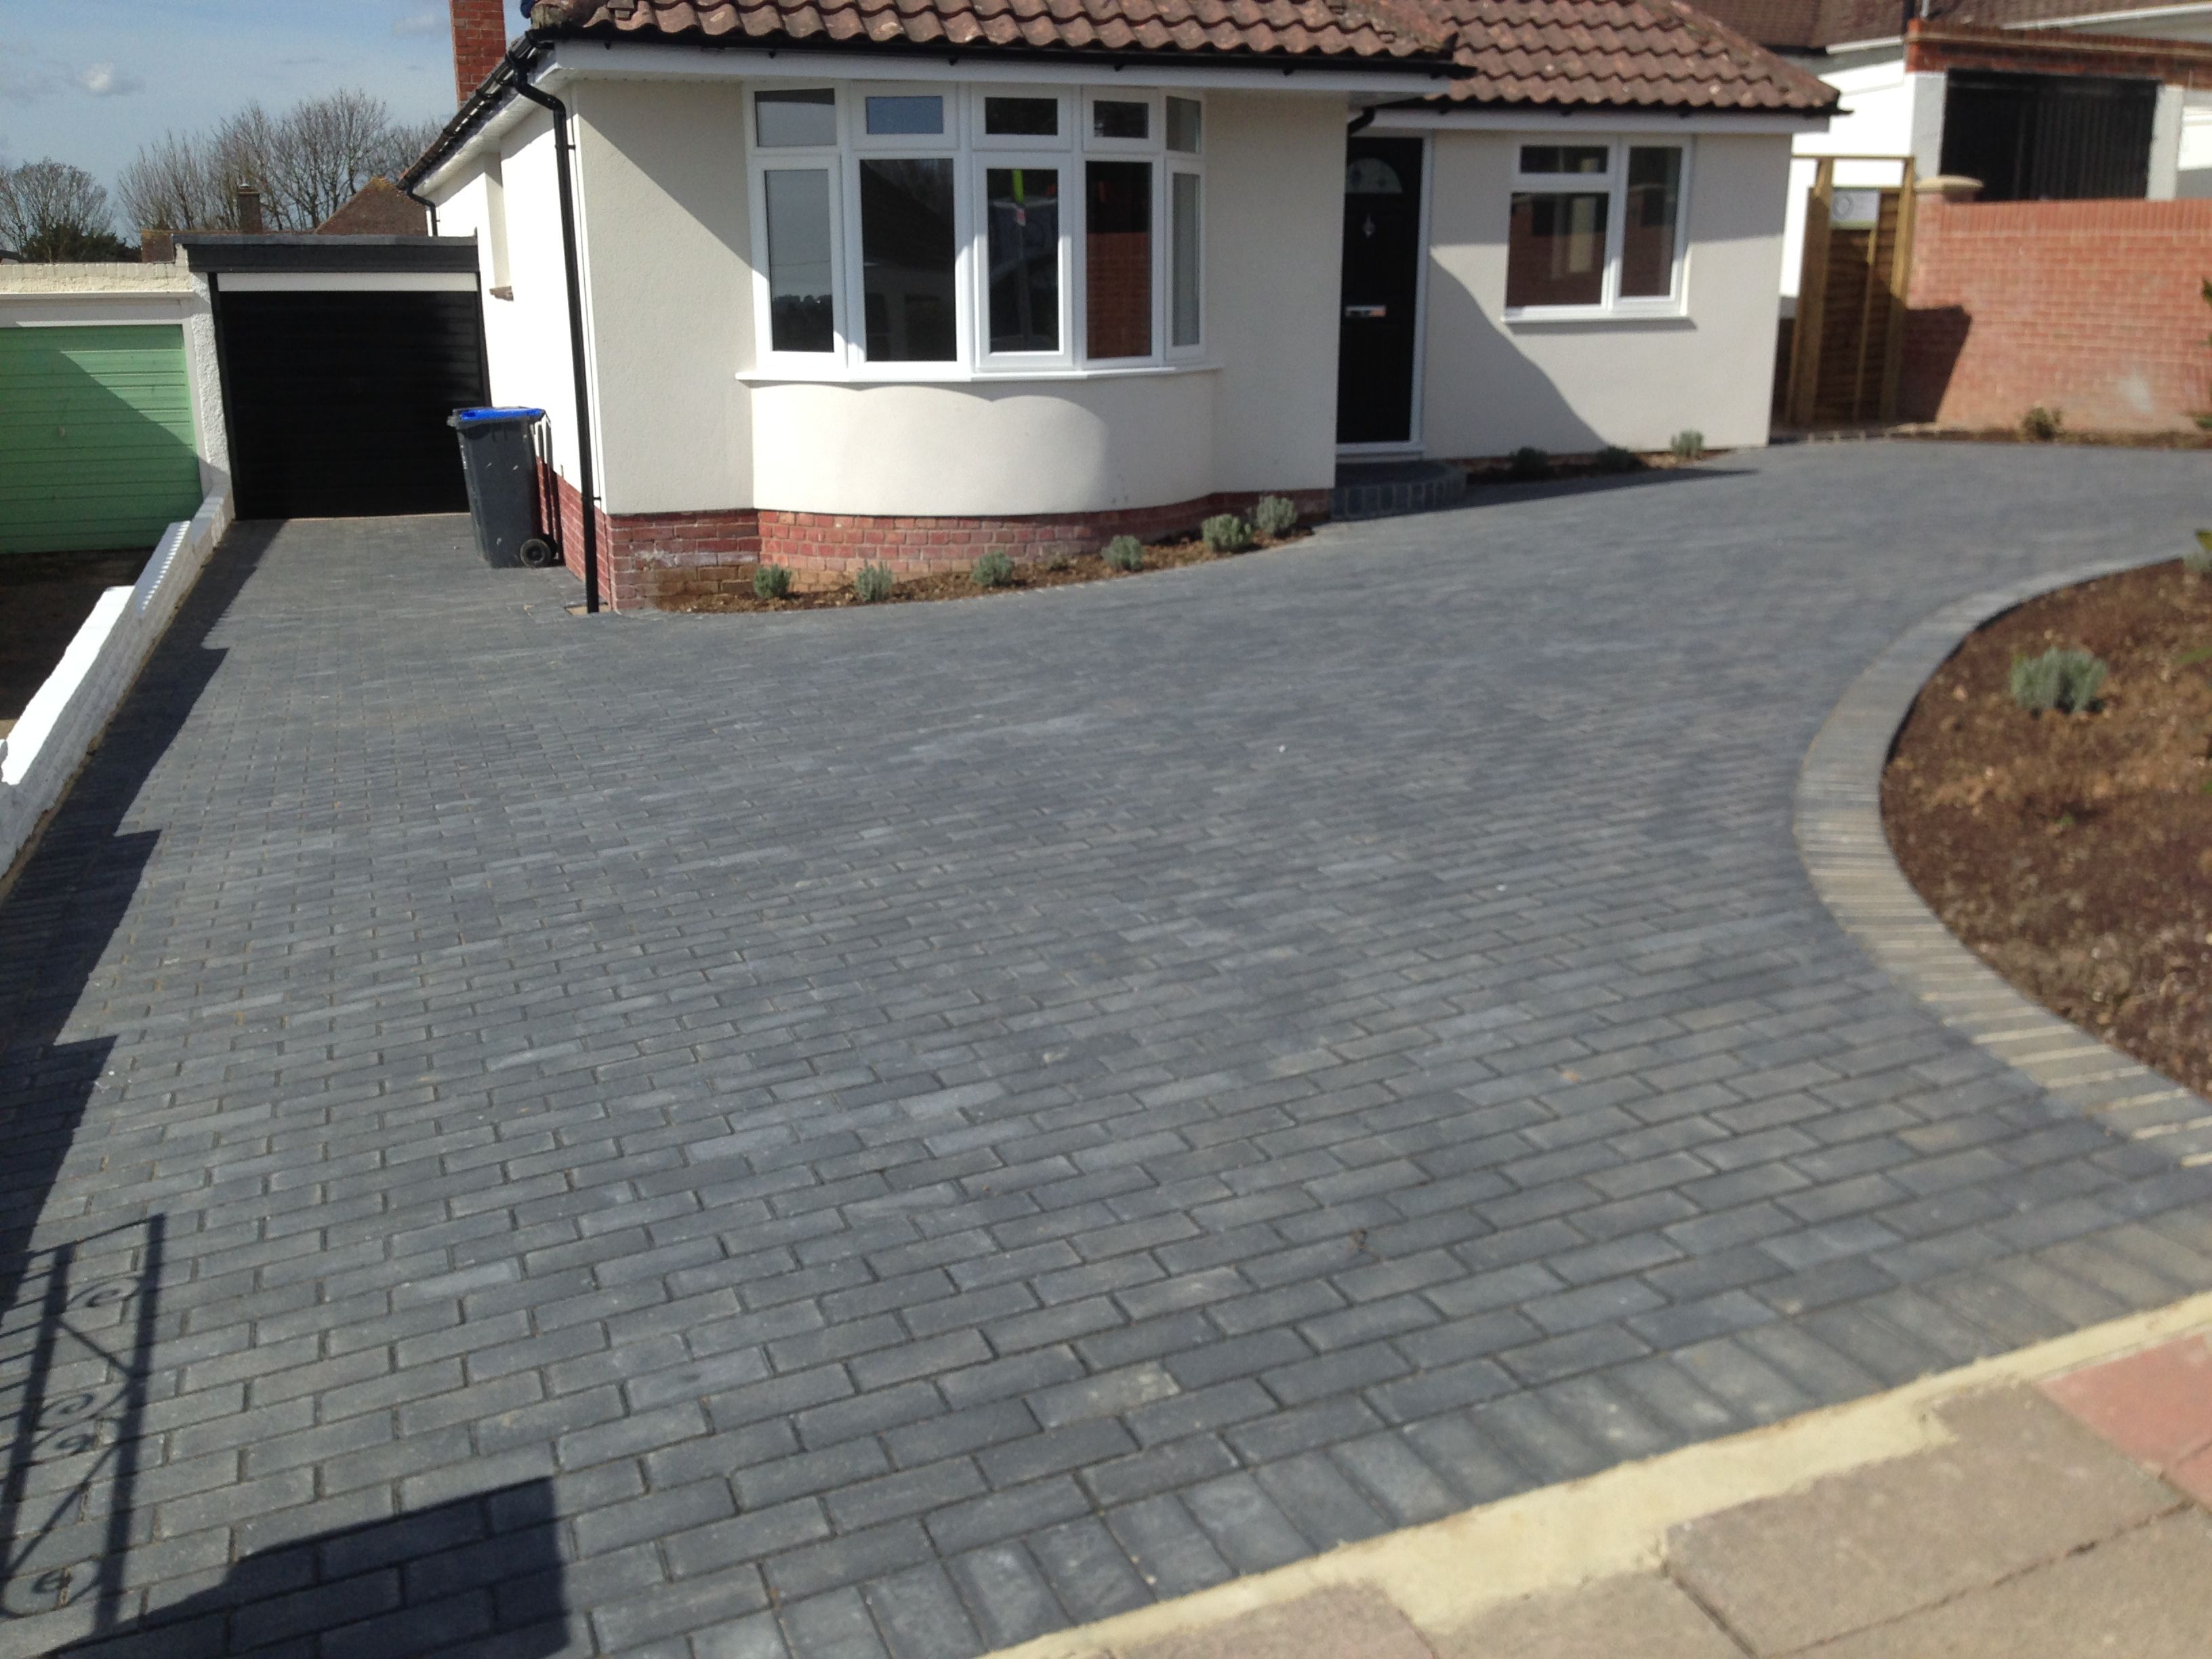 21+ Stunning Picture Collection for Paving Ideas & Driveway Ideas ...